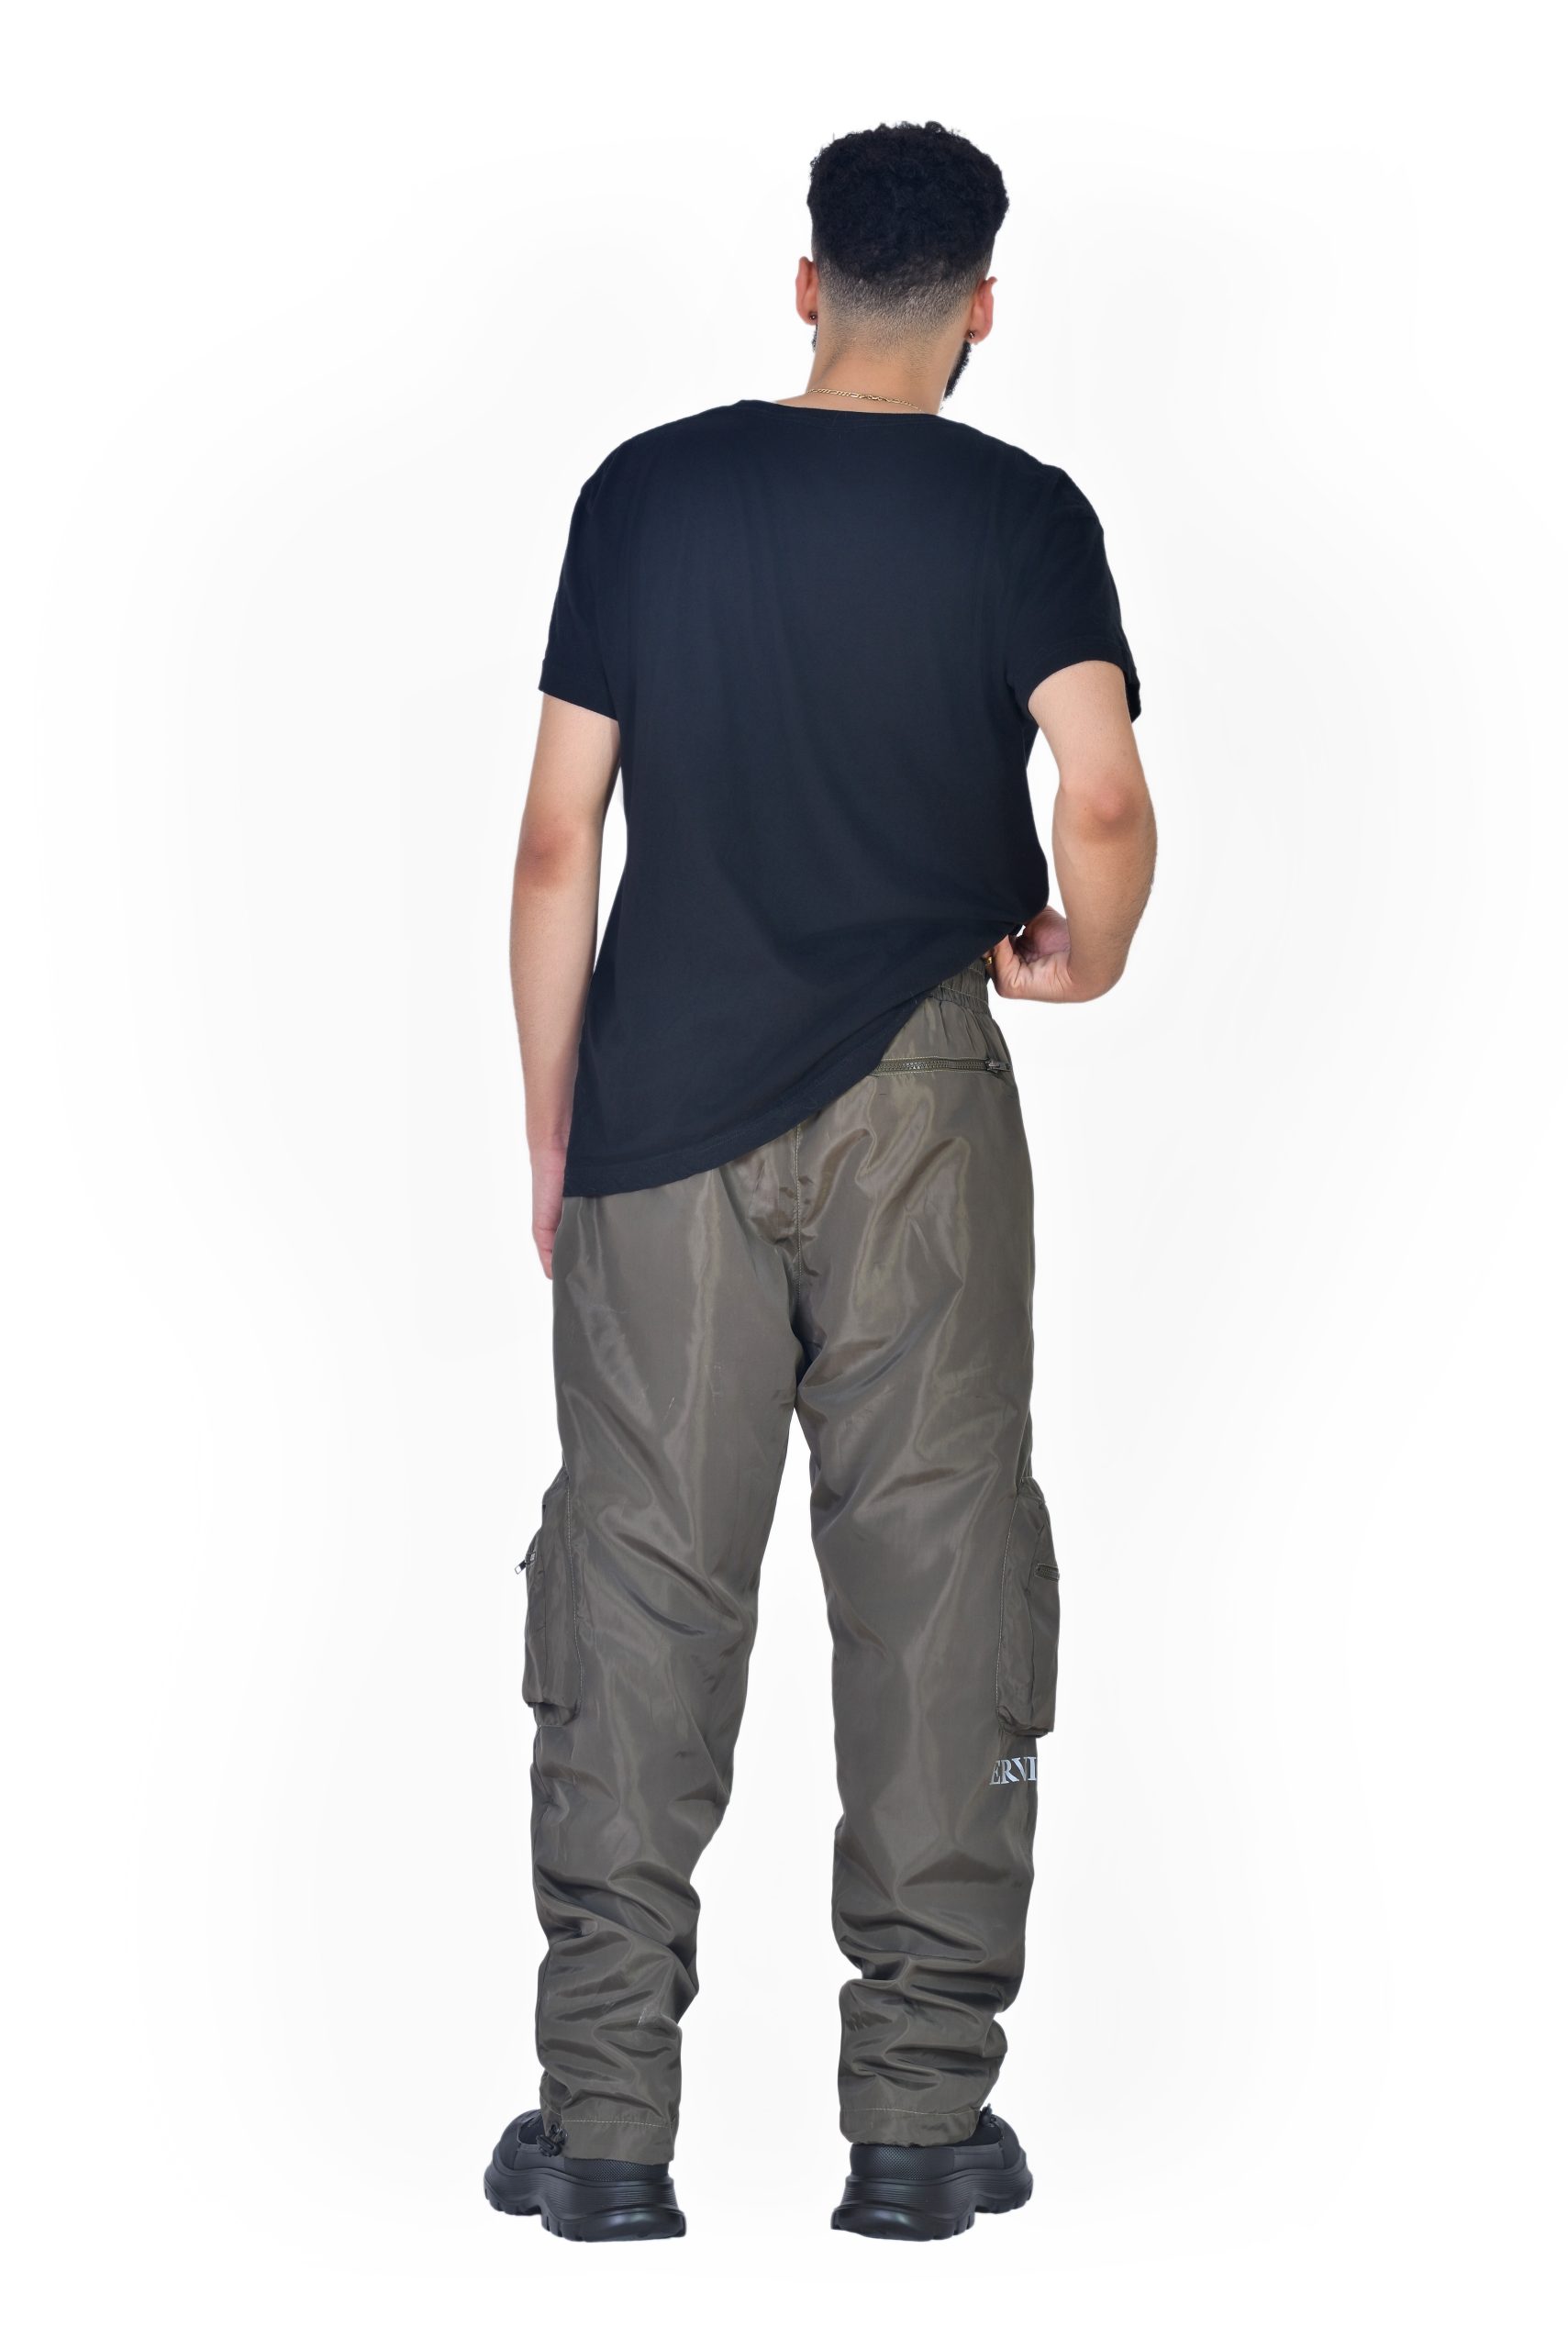 Cargo Pants for men in olive green colour, made of shell nylon fabric and adjustable waistband